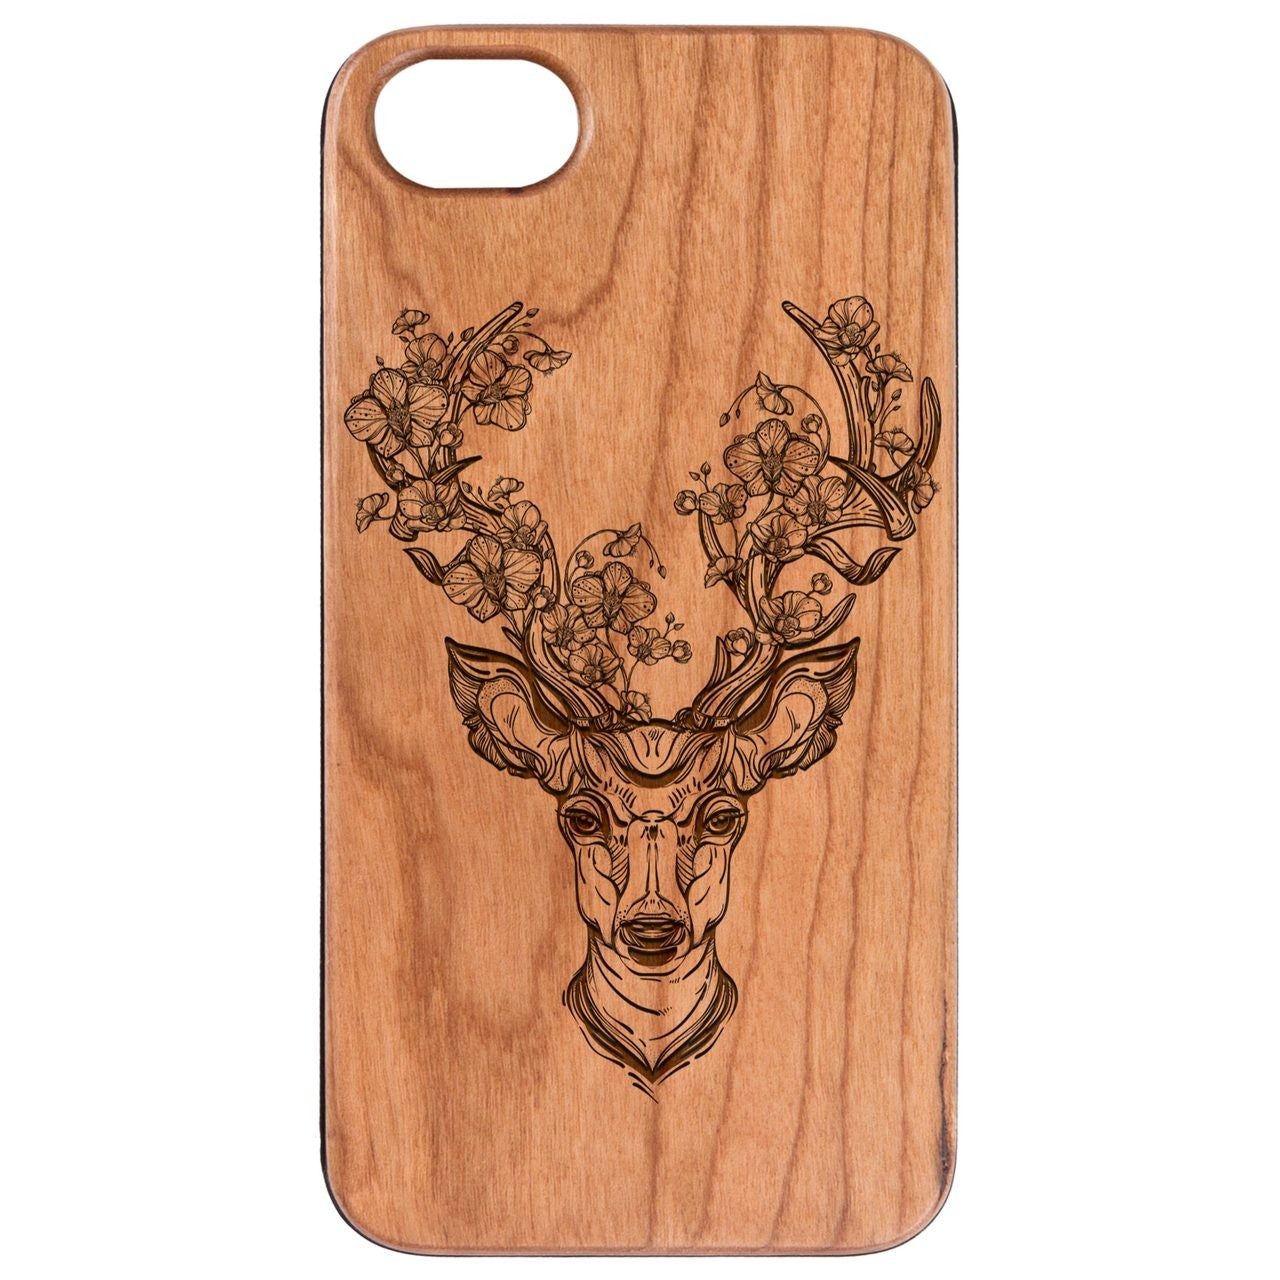  Deer with Flowers - Engraved - Wooden Phone Case - IPhone 13 Models